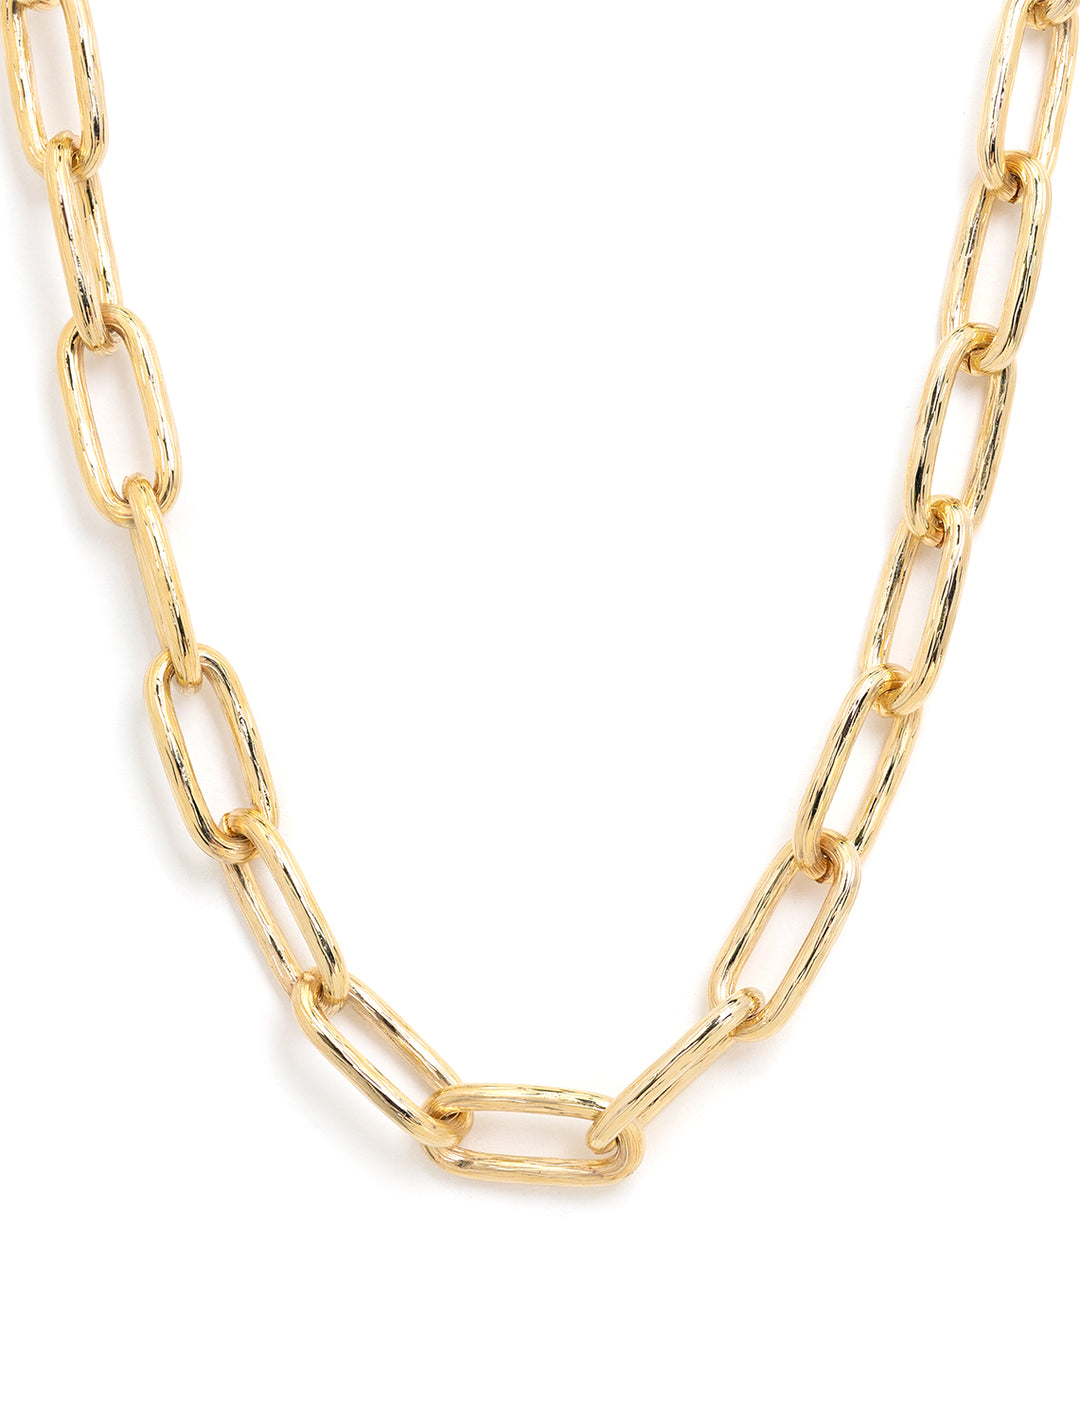 Front view of AV Max's birch chain necklace.